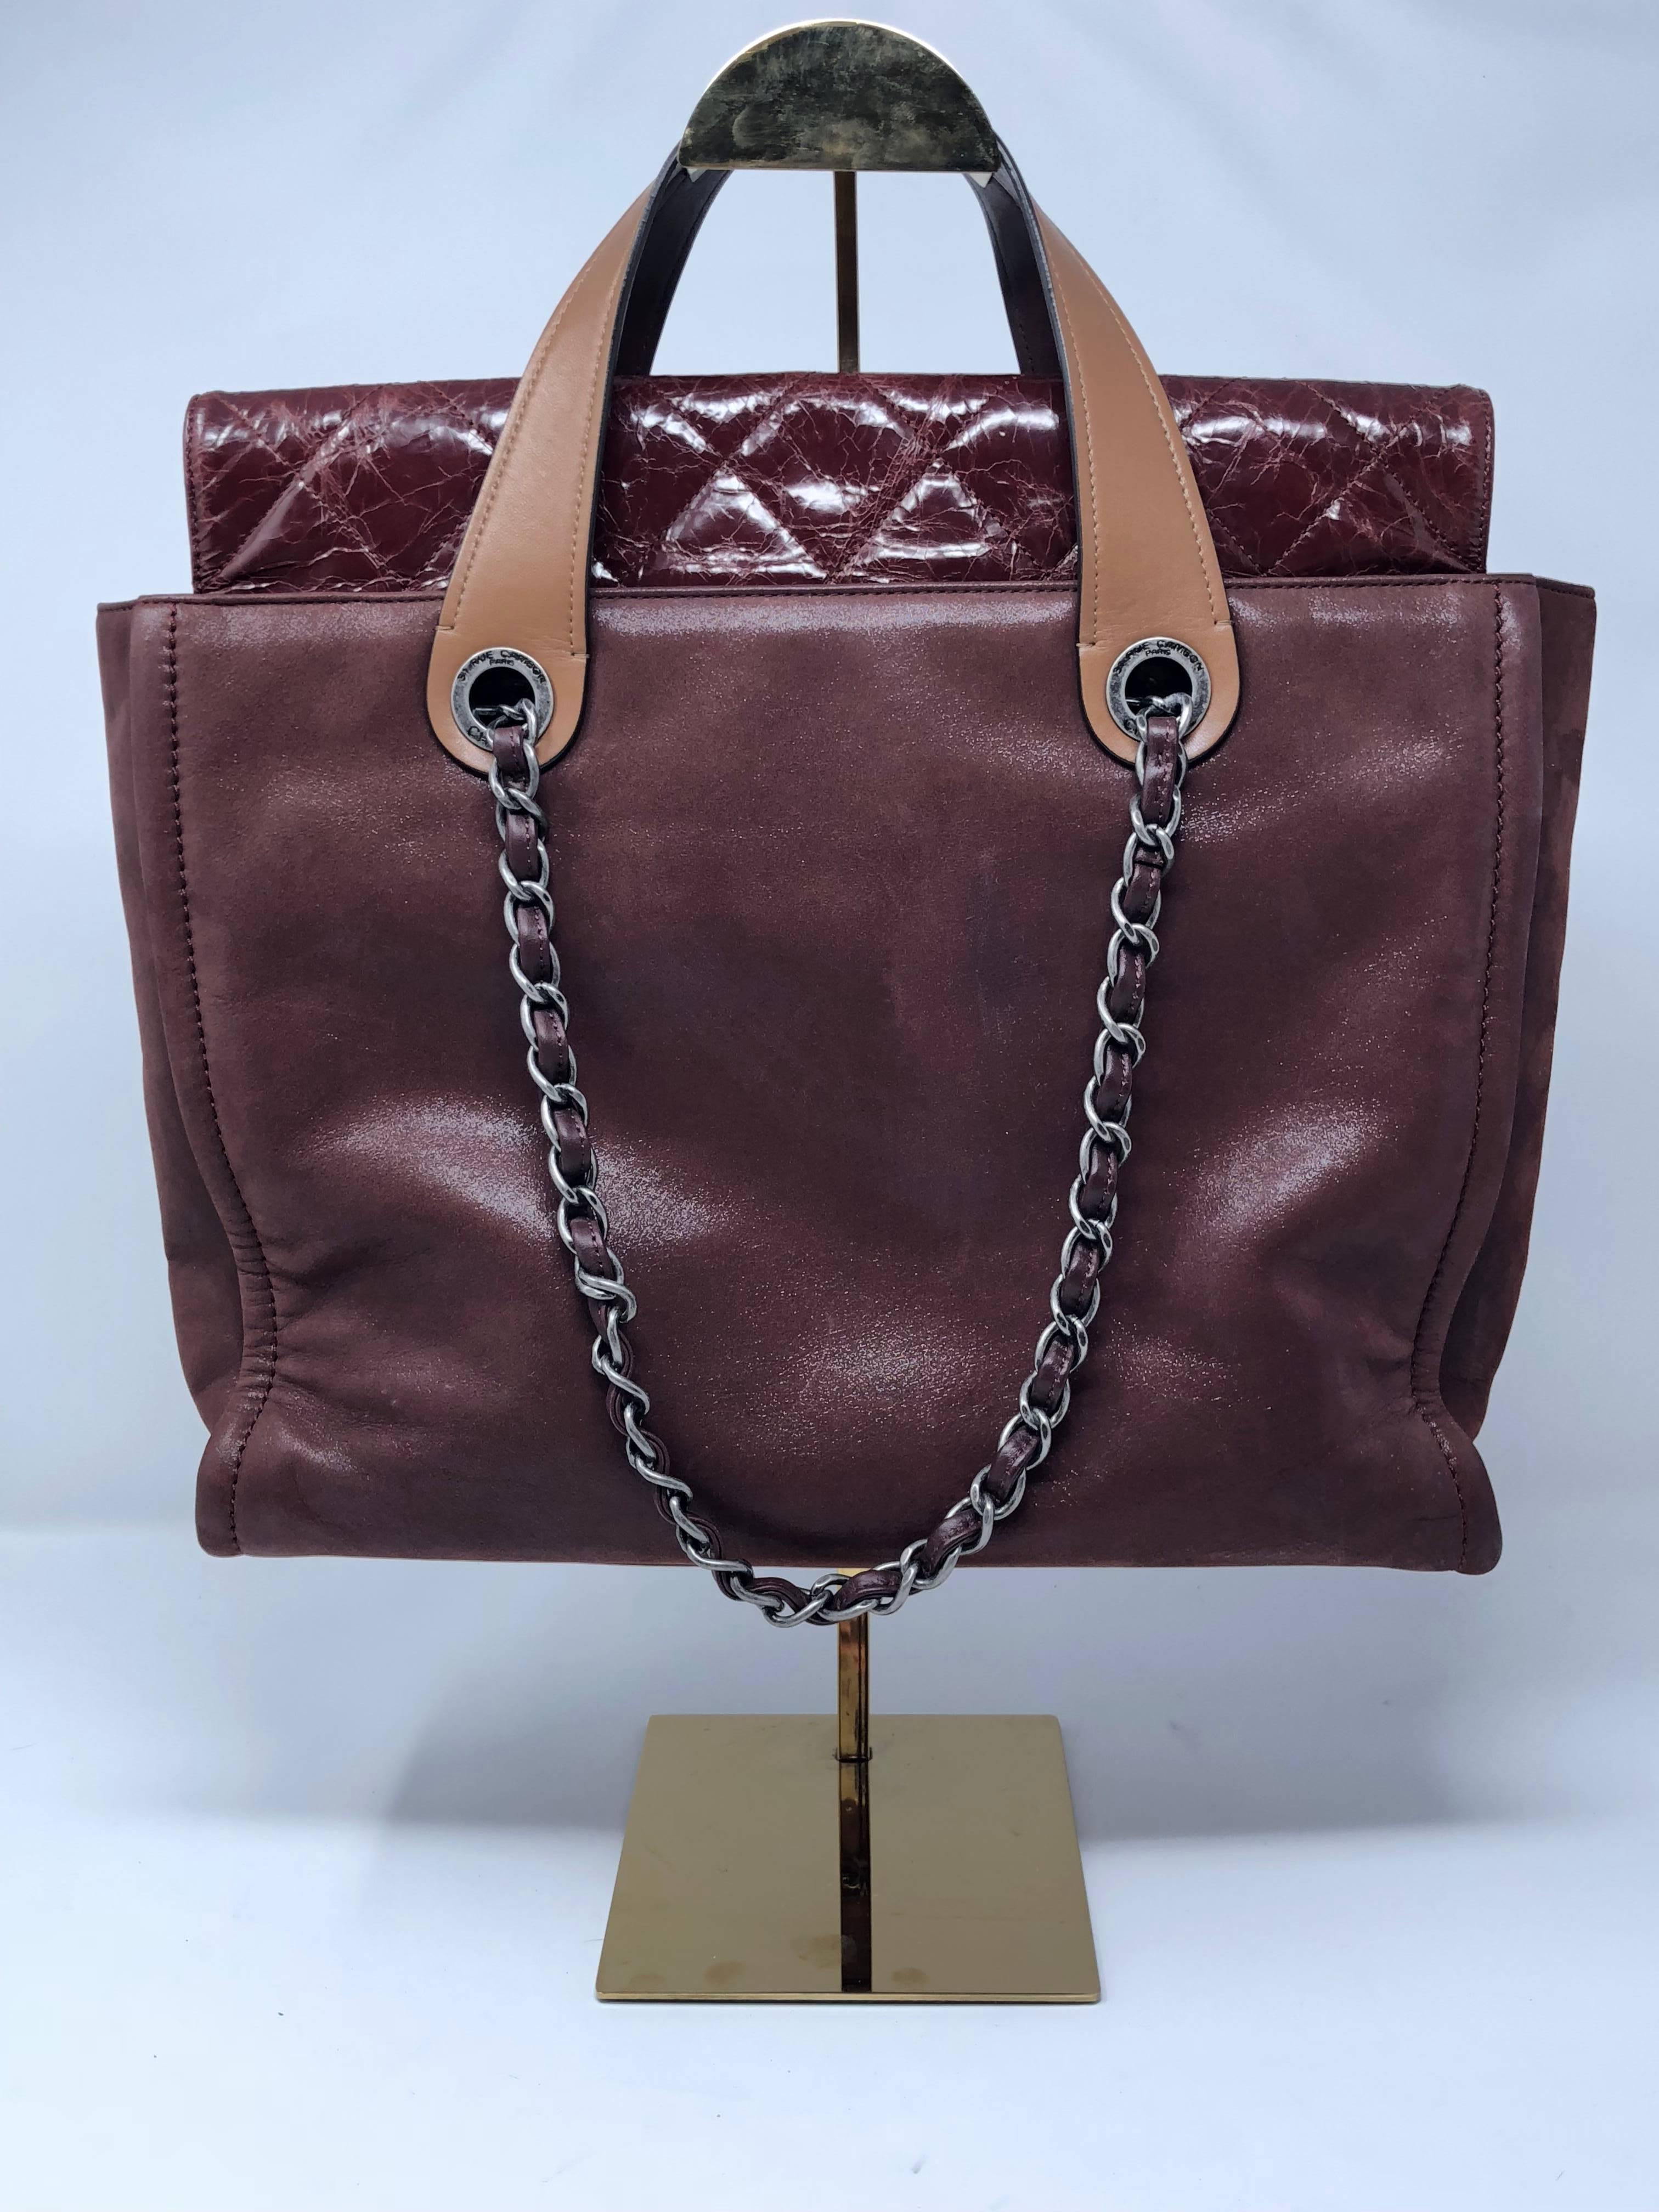 Chanel In the Mix Portobello Soft Tote Quilted Iridescent Calfskin in Burgundy. Good condition. From 2010-2011 collection. This versatile tote can be worn 2 ways and has aged silver-tone hardware and accents.  Handle drop is 2.5 inches. Strap drop